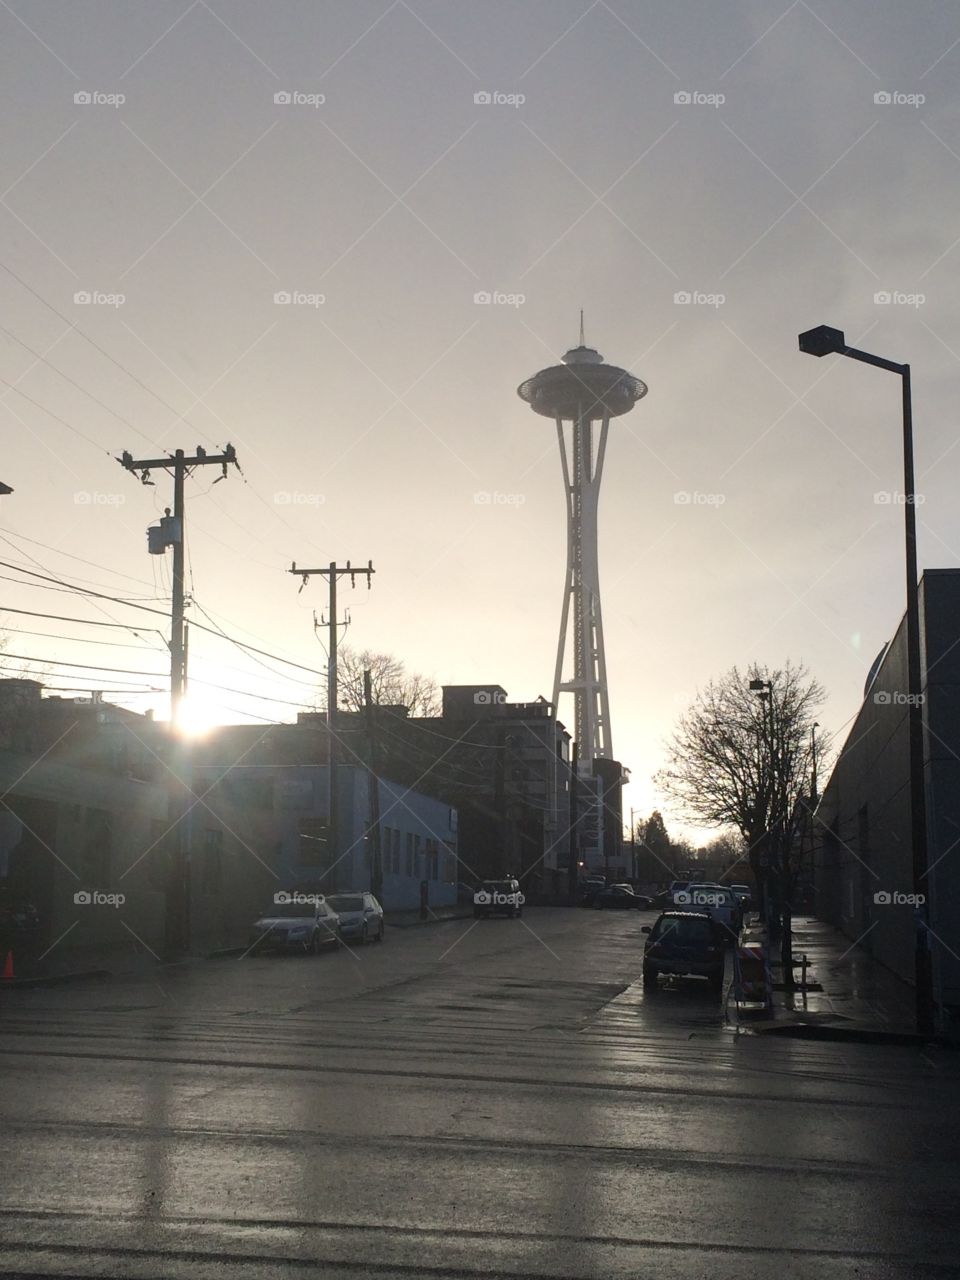 The Seattle Space Needle seen in a wet sunset haze.